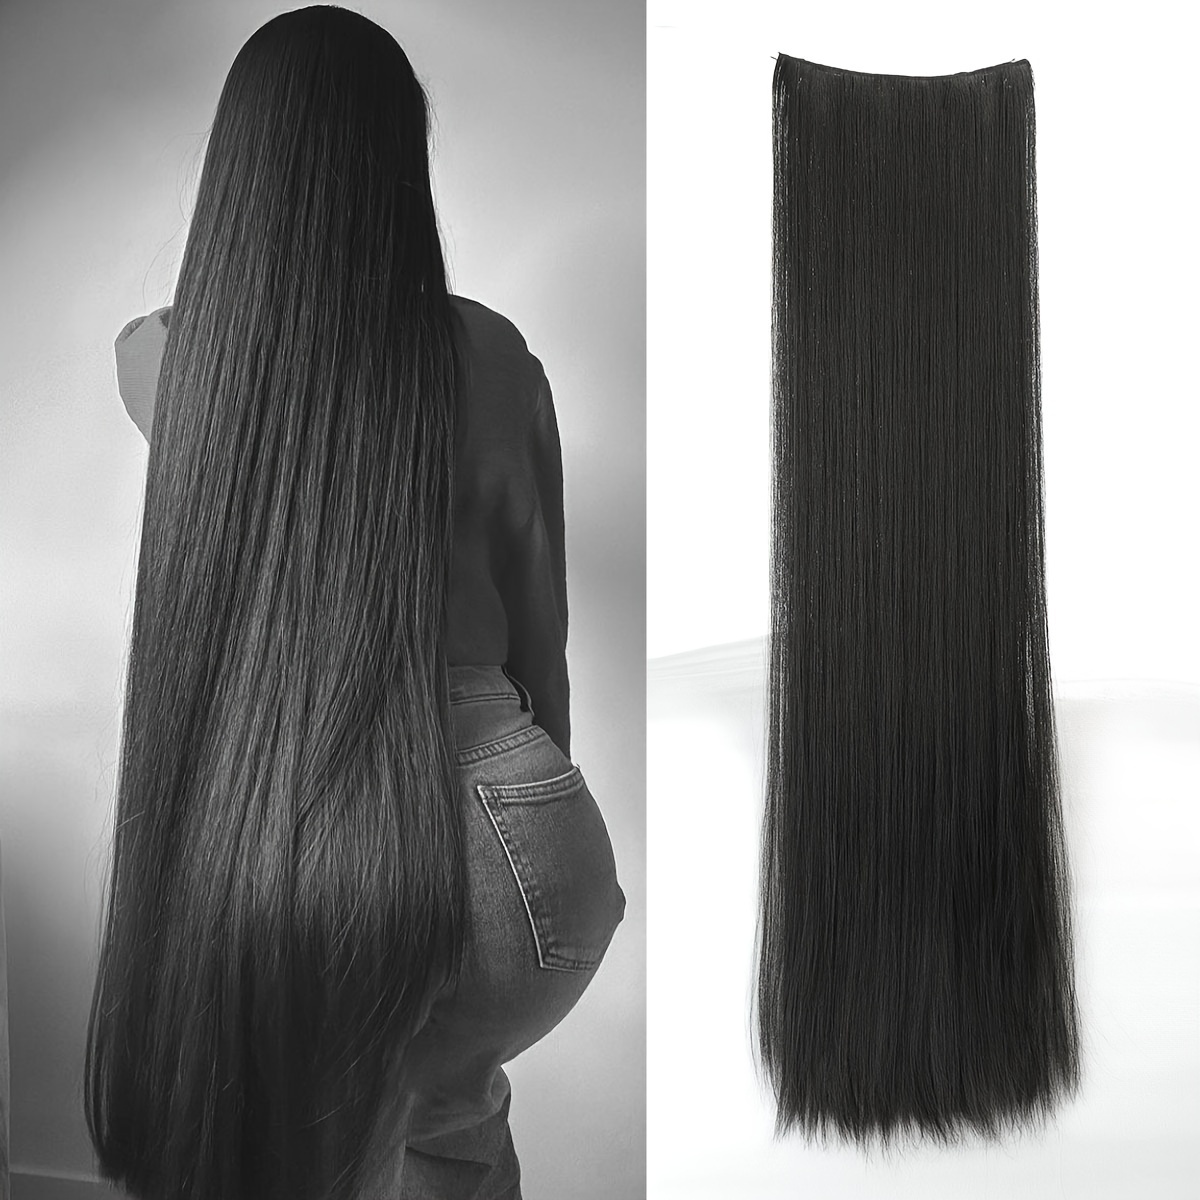 

Black Extra Long Straight Hair Extensions, 20-40 Inch 5 Clips Synthetic Hair Extension Heat Resistant Fake Hairpiece For Women Music Festivals, Parties, Cosplay, Black Friday, Holidays And Daily Use